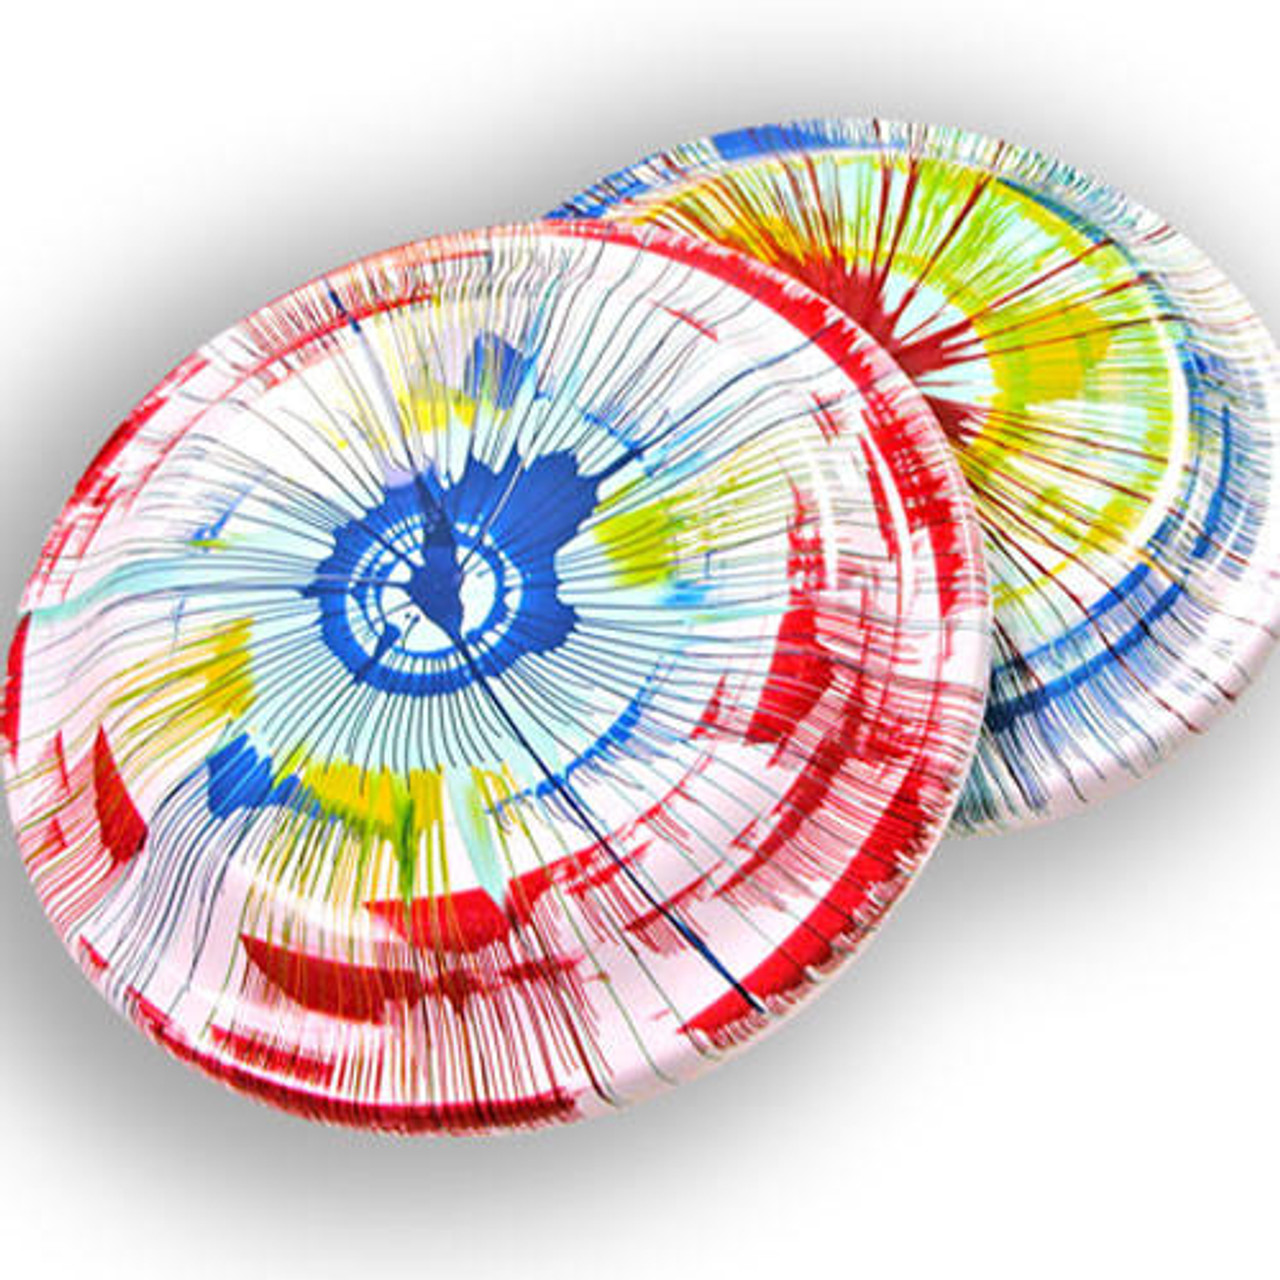 Spin Art Frisbee. White Fun Flyers That Can Be Painted